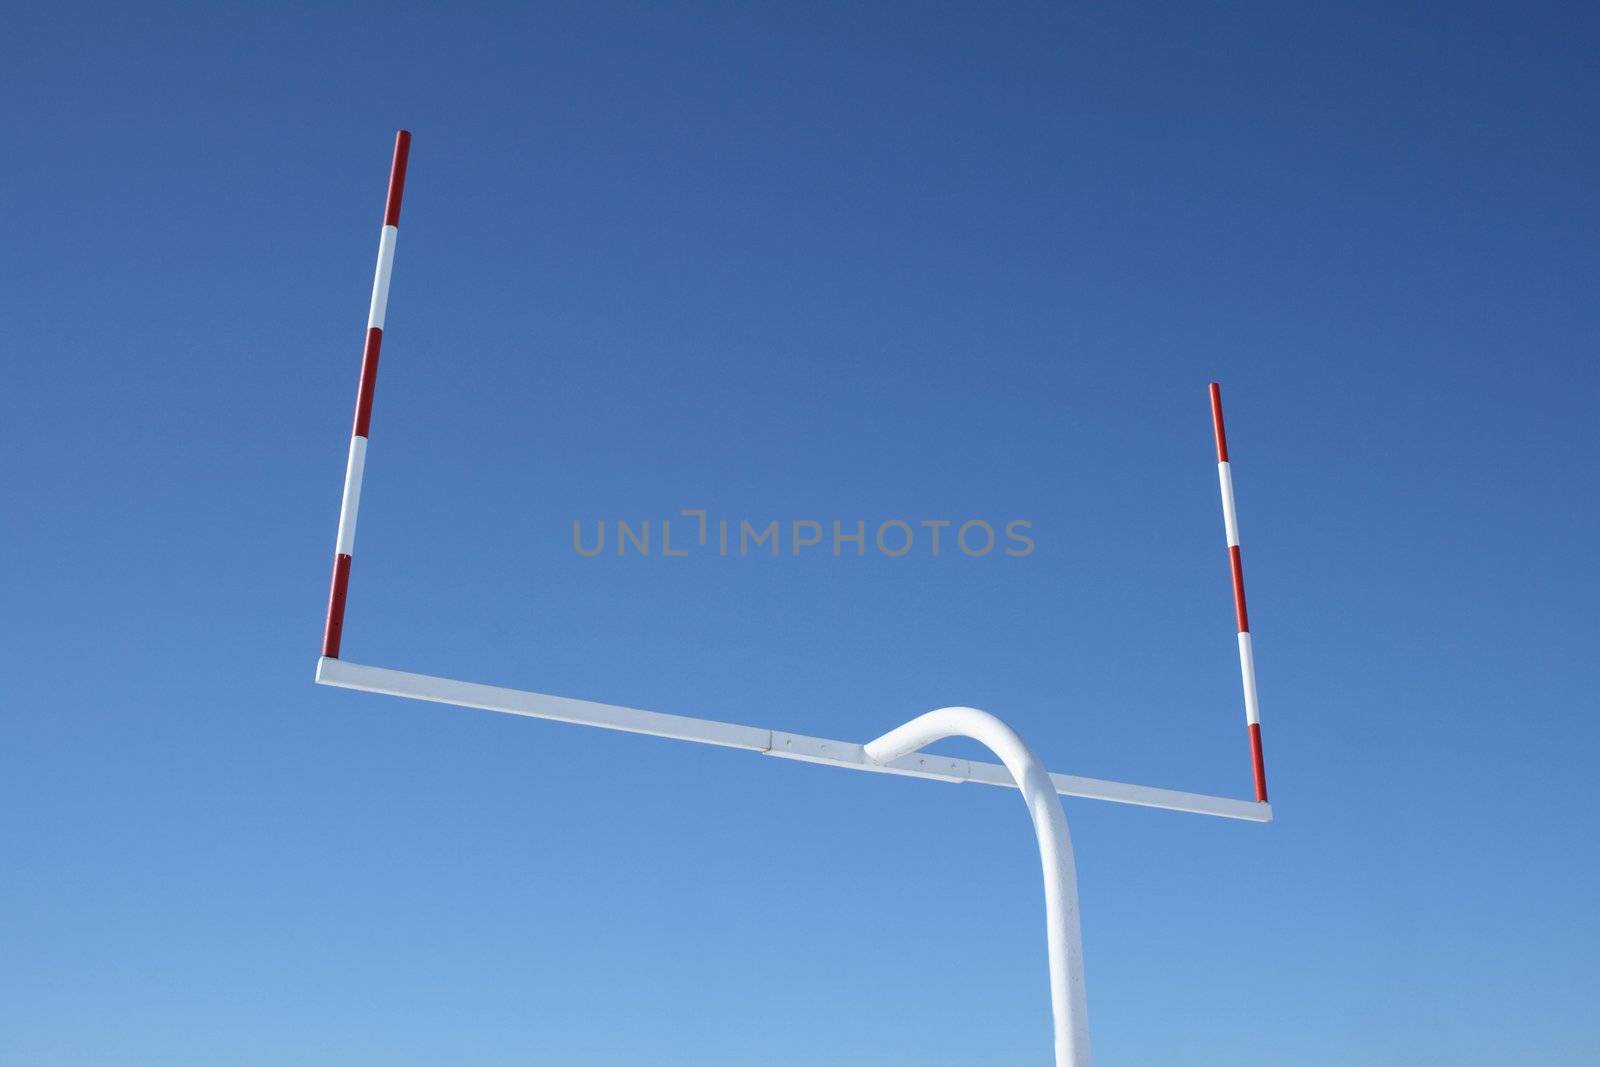 Uprights of American football goal posts against the blue sky.